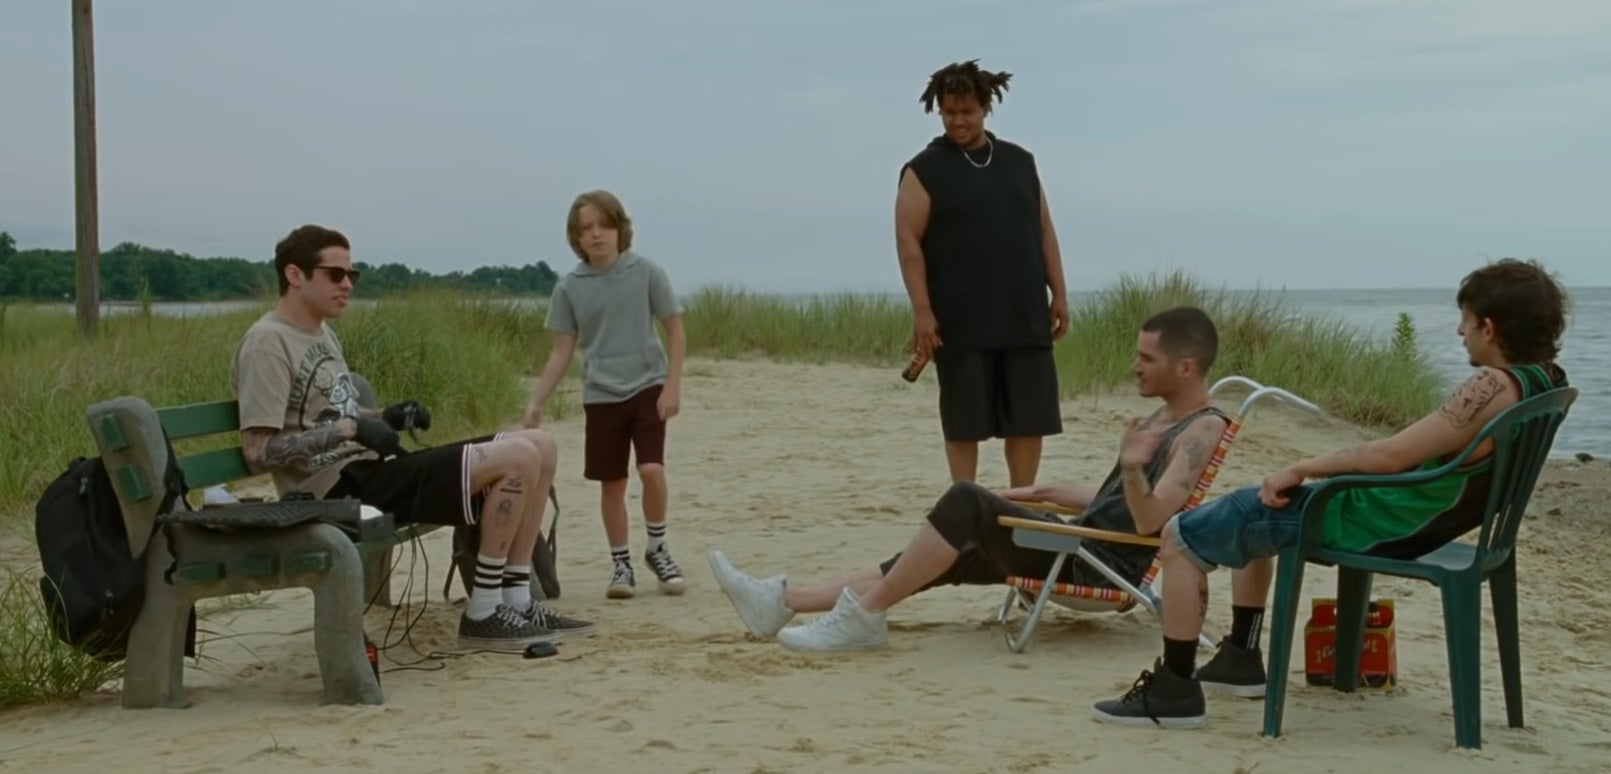 pete davidson, a child, and other castmates on the beach in &quot;the king of staten island&quot;